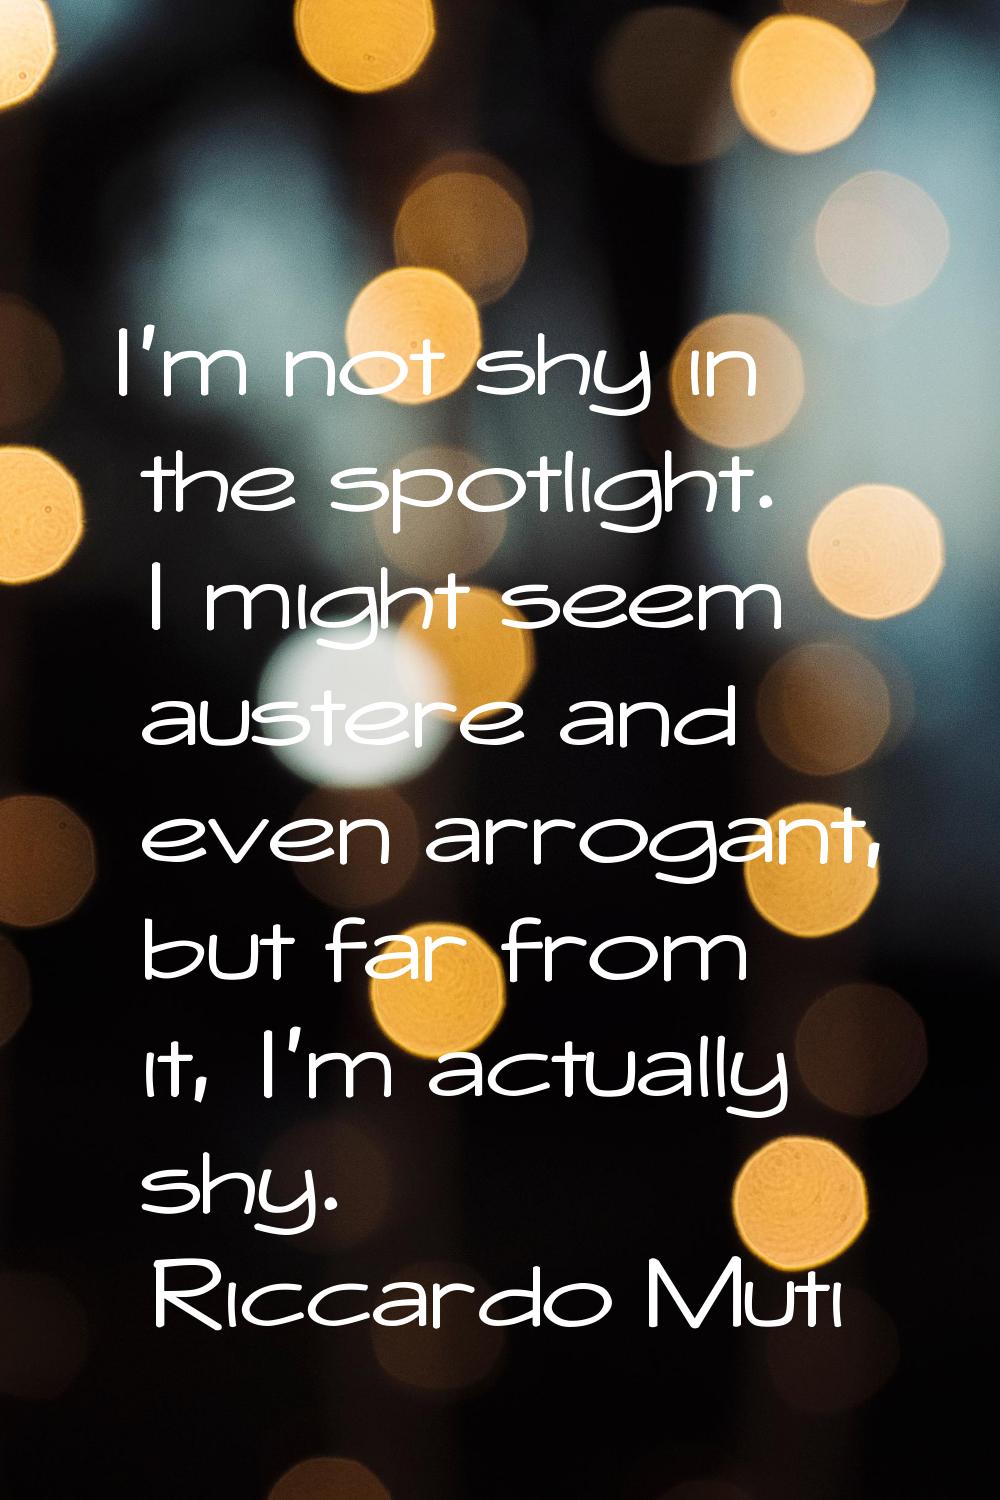 I'm not shy in the spotlight. I might seem austere and even arrogant, but far from it, I'm actually